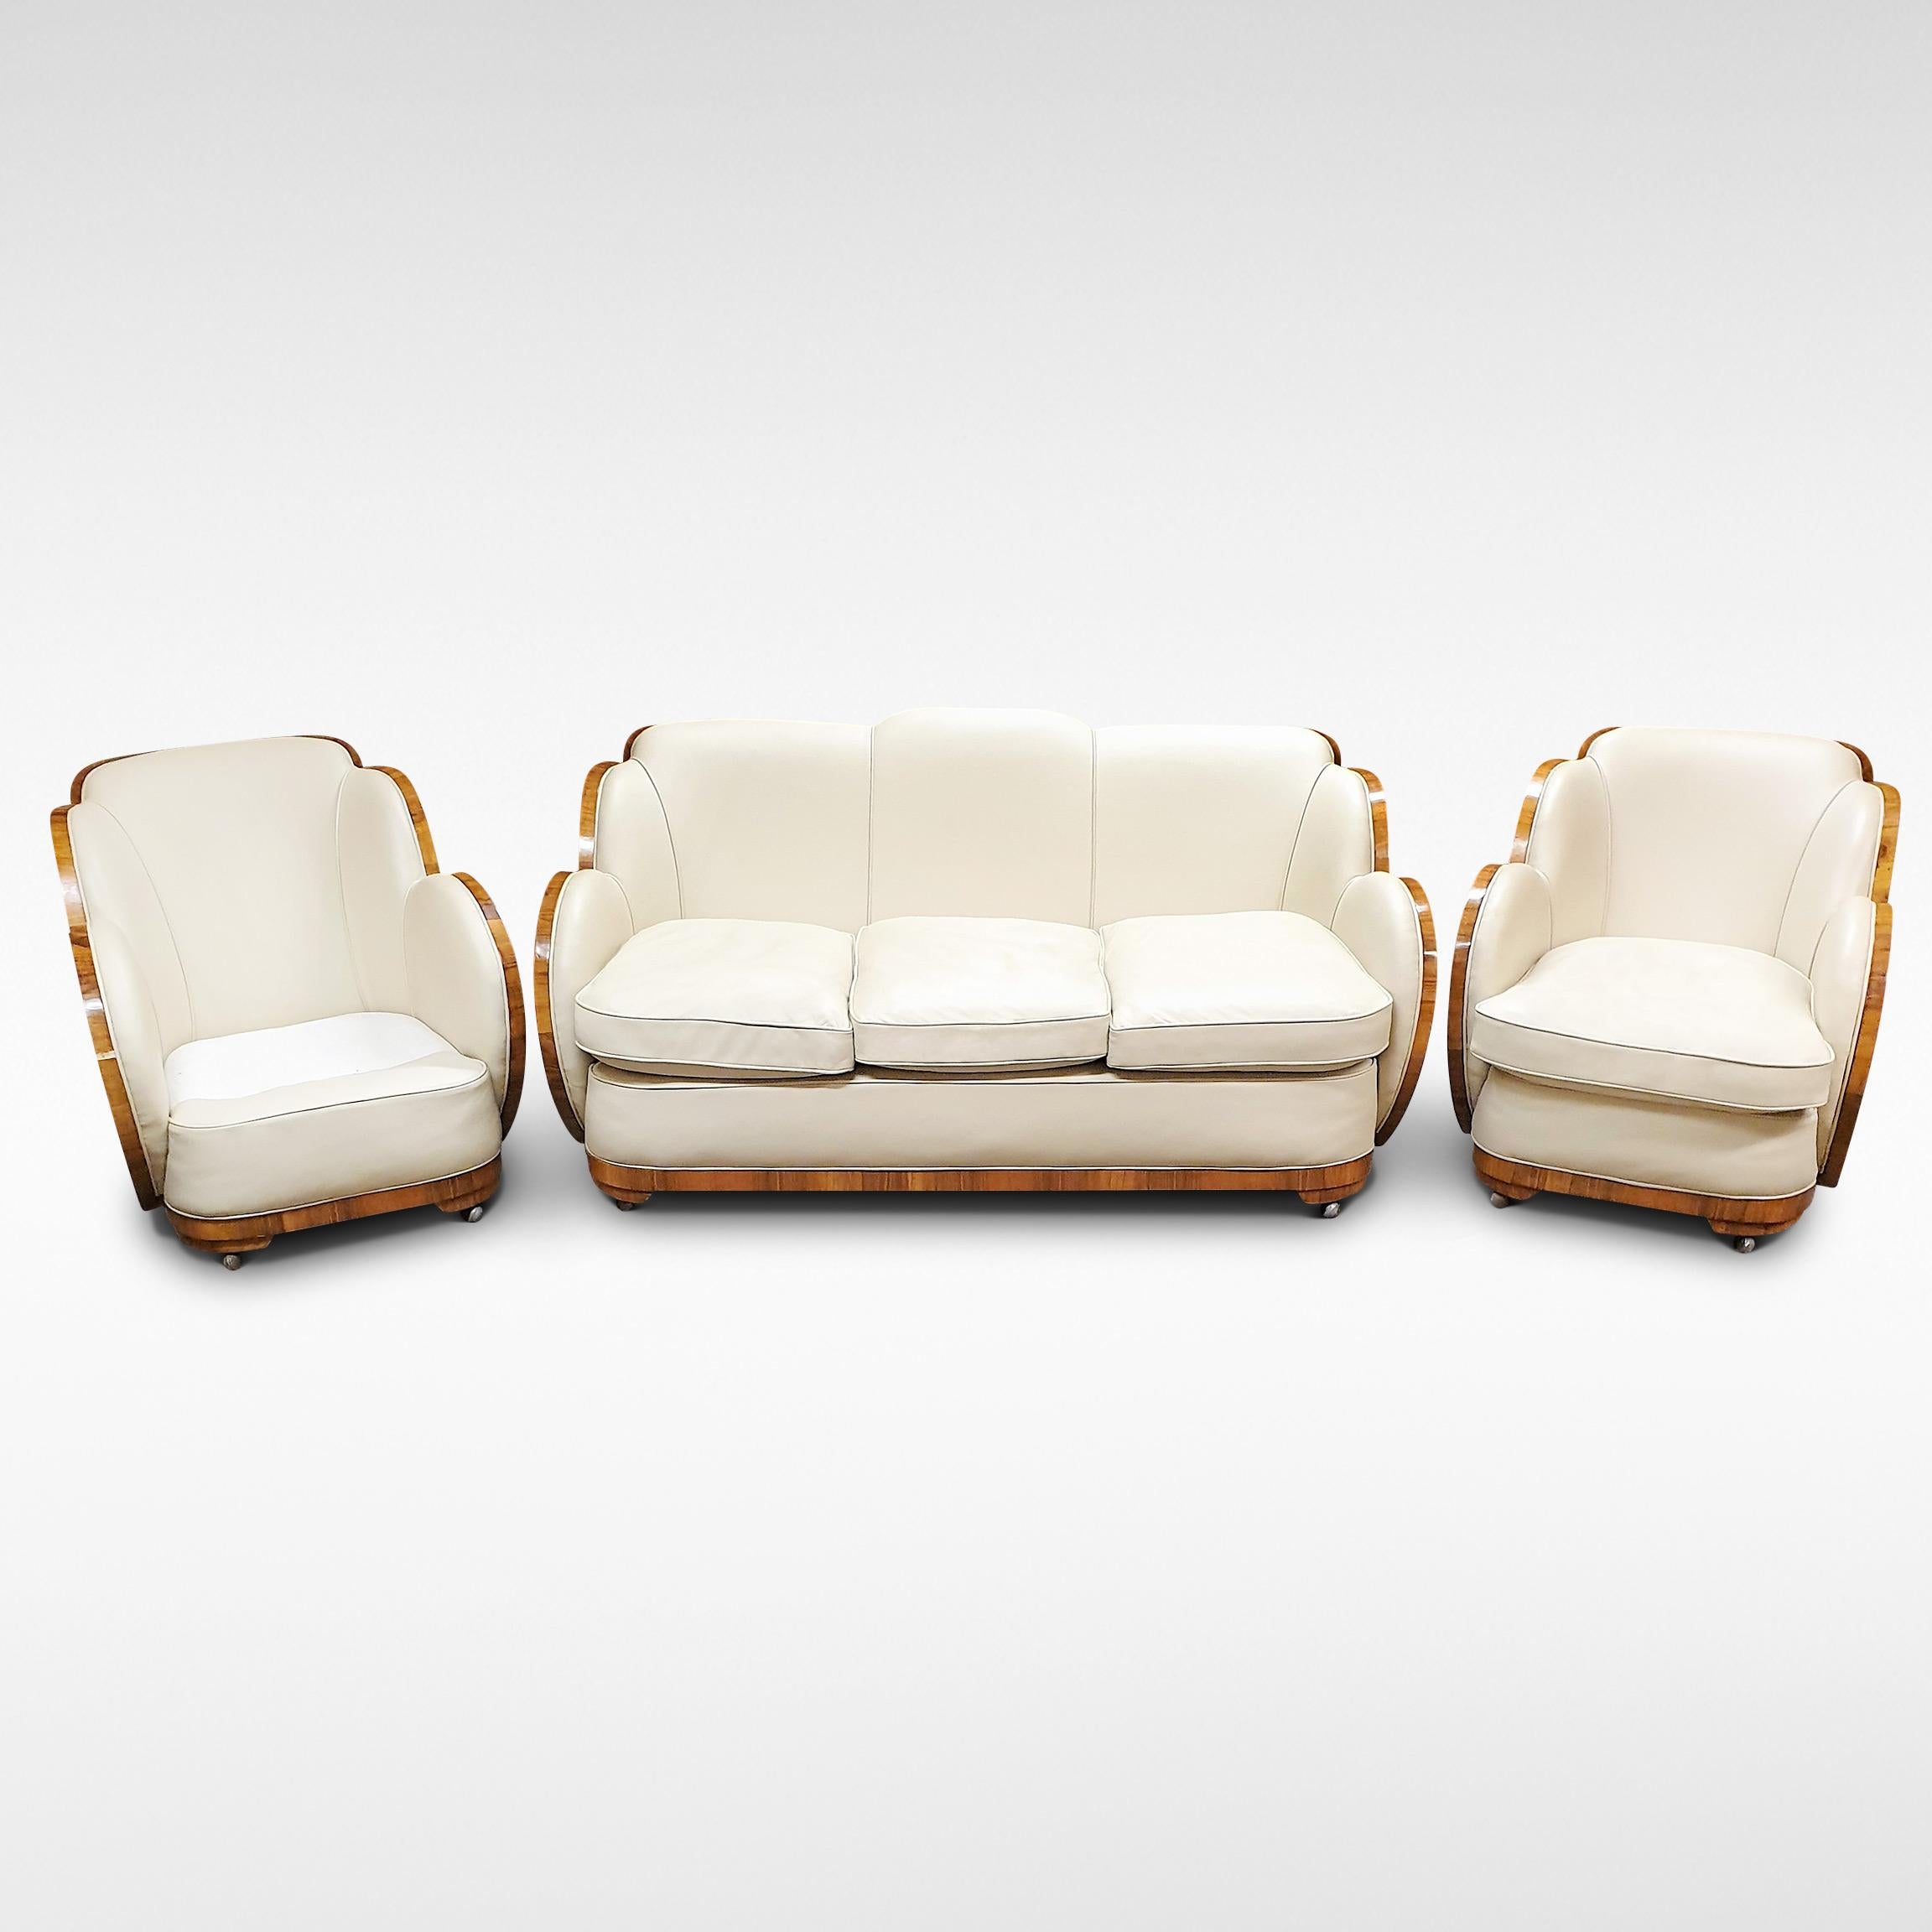 A superb example of the Art Deco cloud lounge suite by Epstein with full wrap-around walnut veneers. The 3- seat sofa and 2 armchairs are upholstered in leather. Dates from circa 1935-1955

The price includes full restoration using original